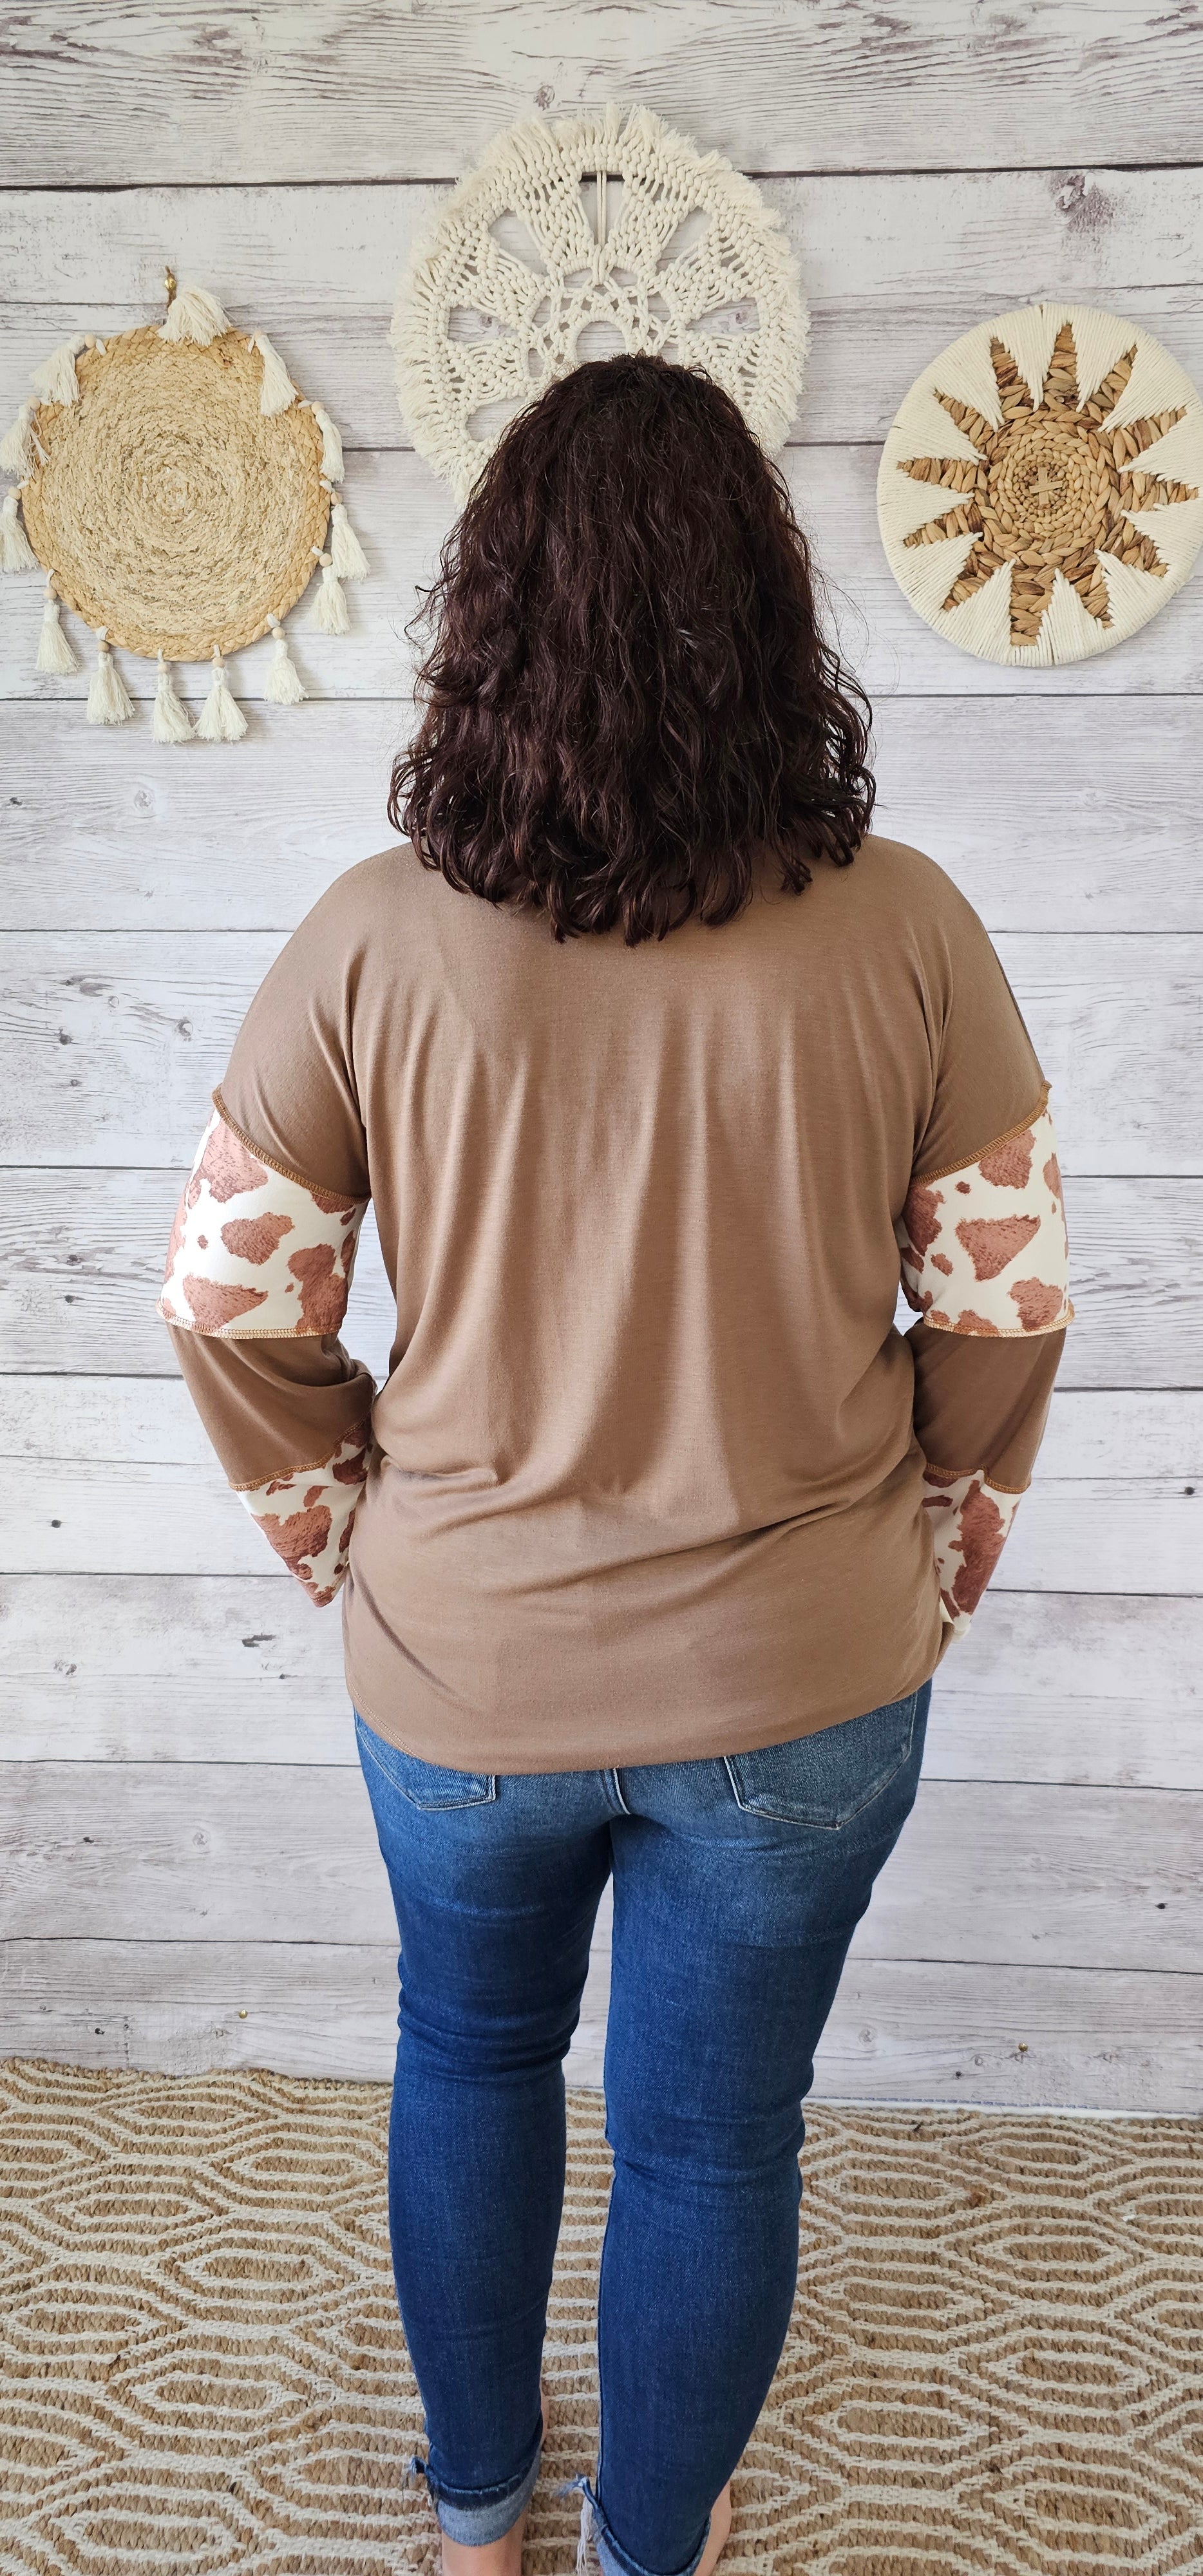 This is a long sleeve, v-neck top with an exposed seam. Cow print and mocha layers. Sizes small through x-large.